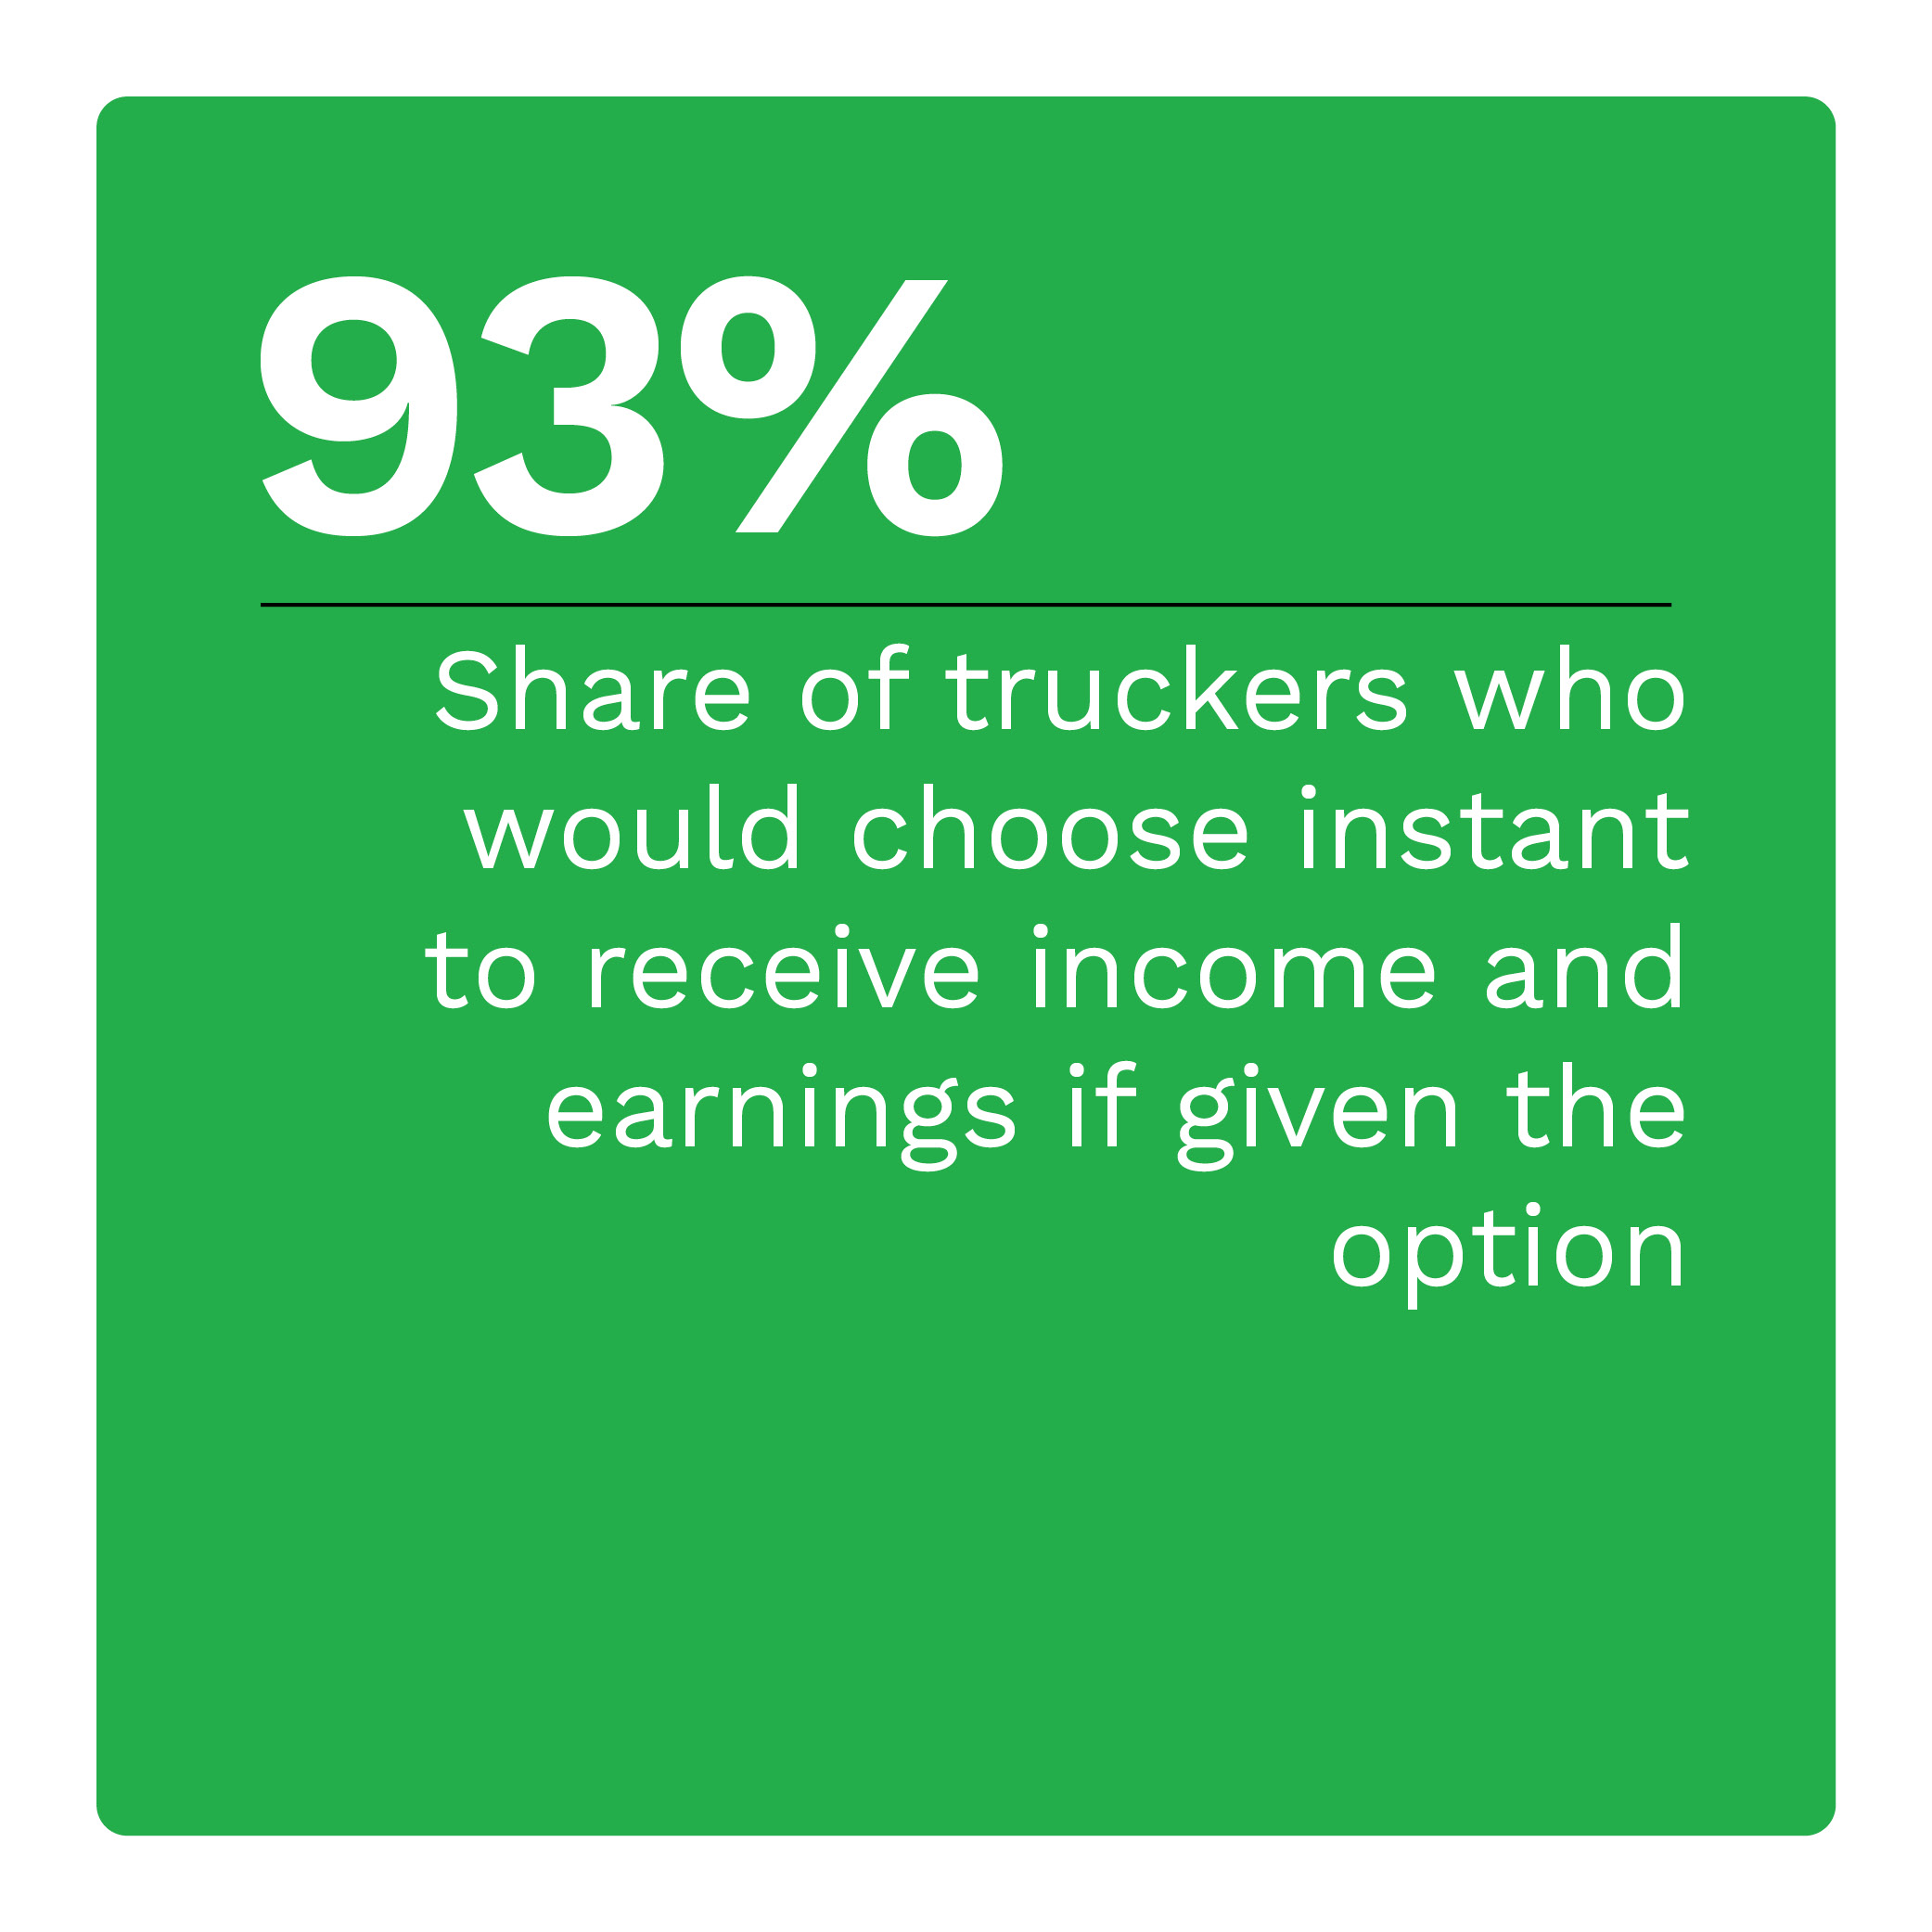  Share of truckers who would choose instant to receive income and earnings if given the option